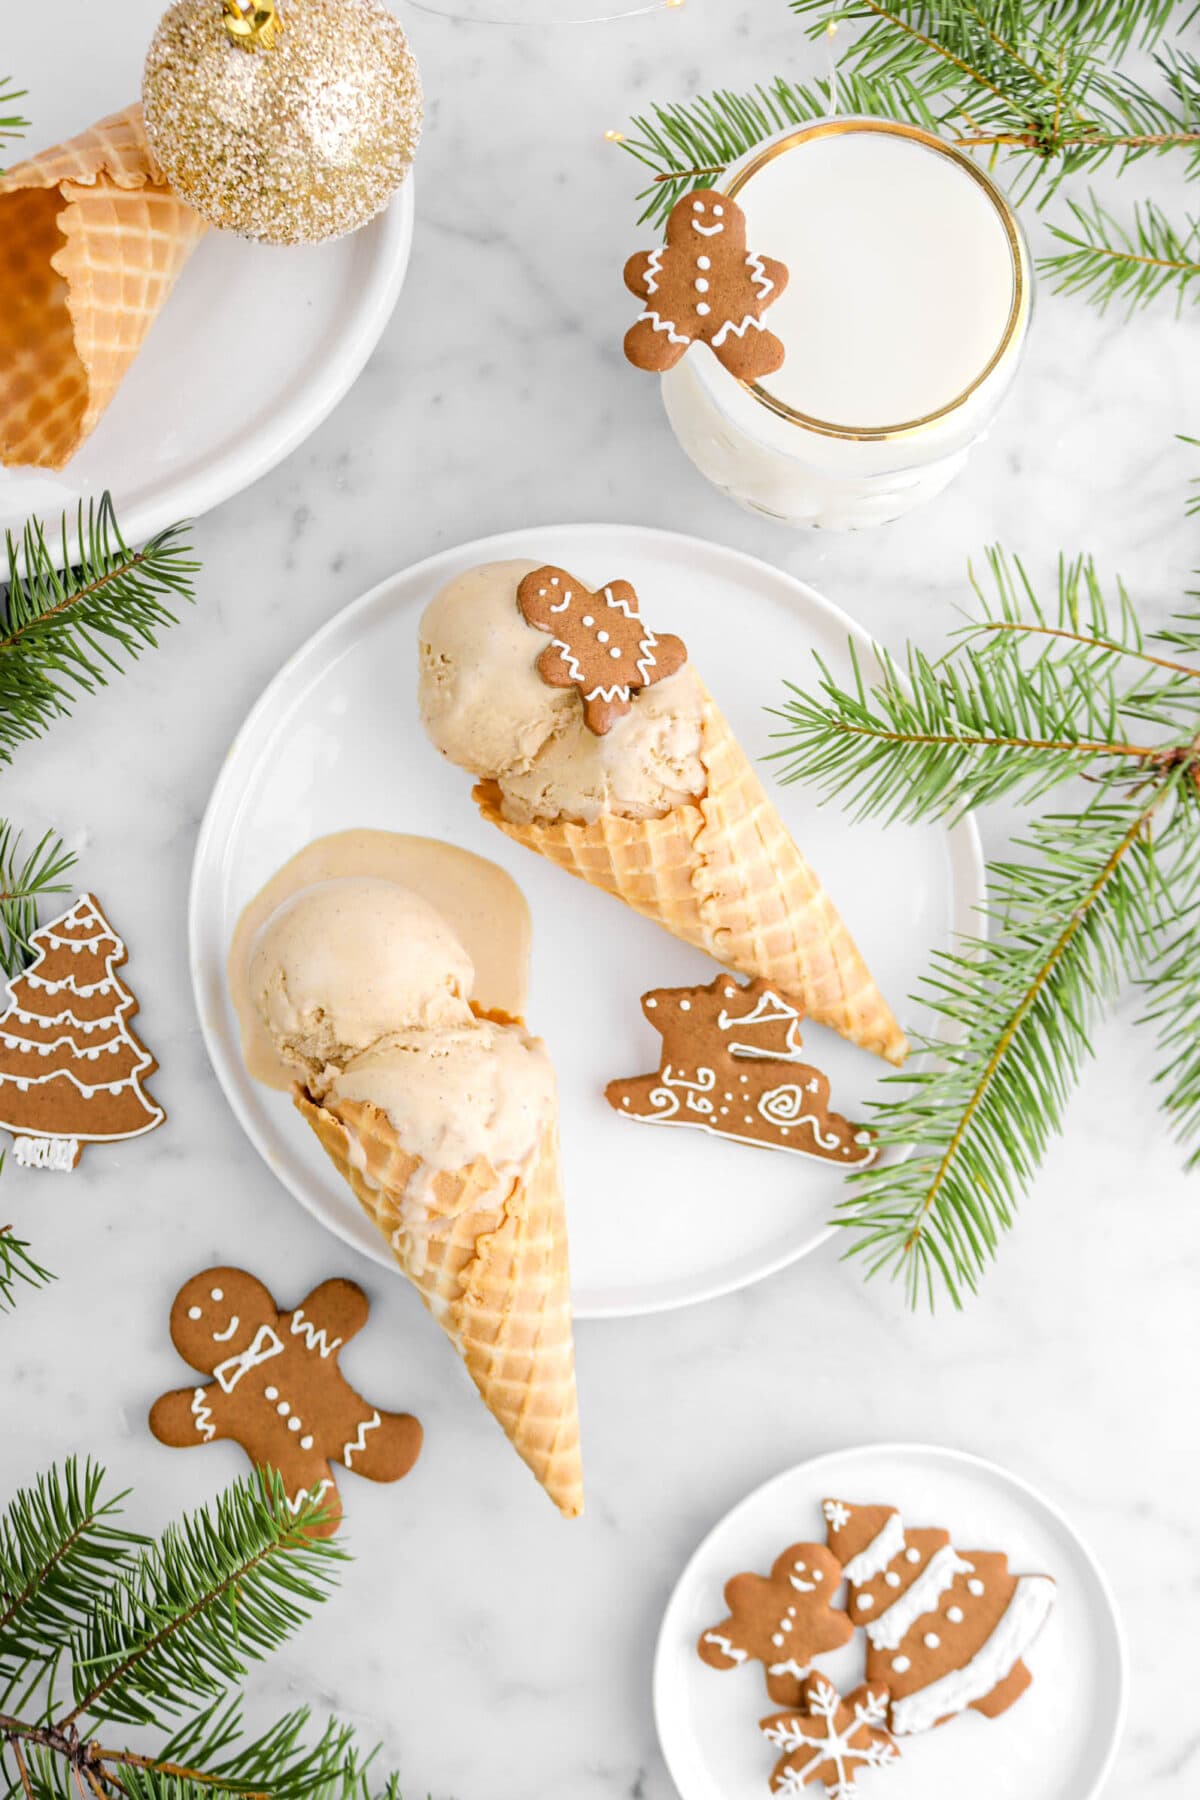 overhead shot of two cones of ice cream on white plate with cookies around, pine branches, and a glass of milk beside.